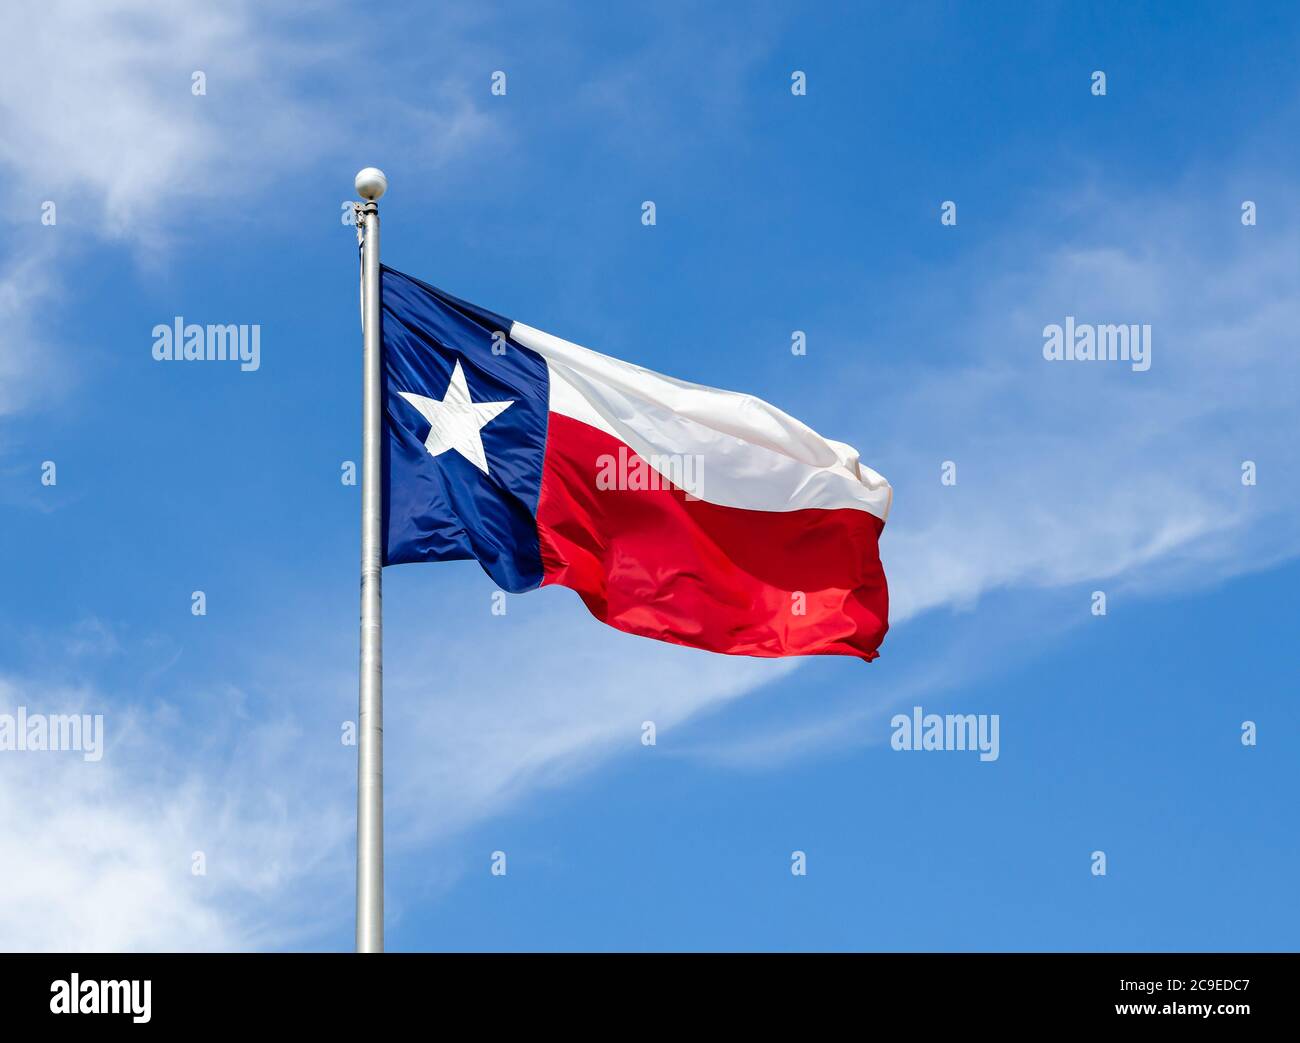 Texas State flag on the pole waving in the wing against blue sky and white clouds Stock Photo